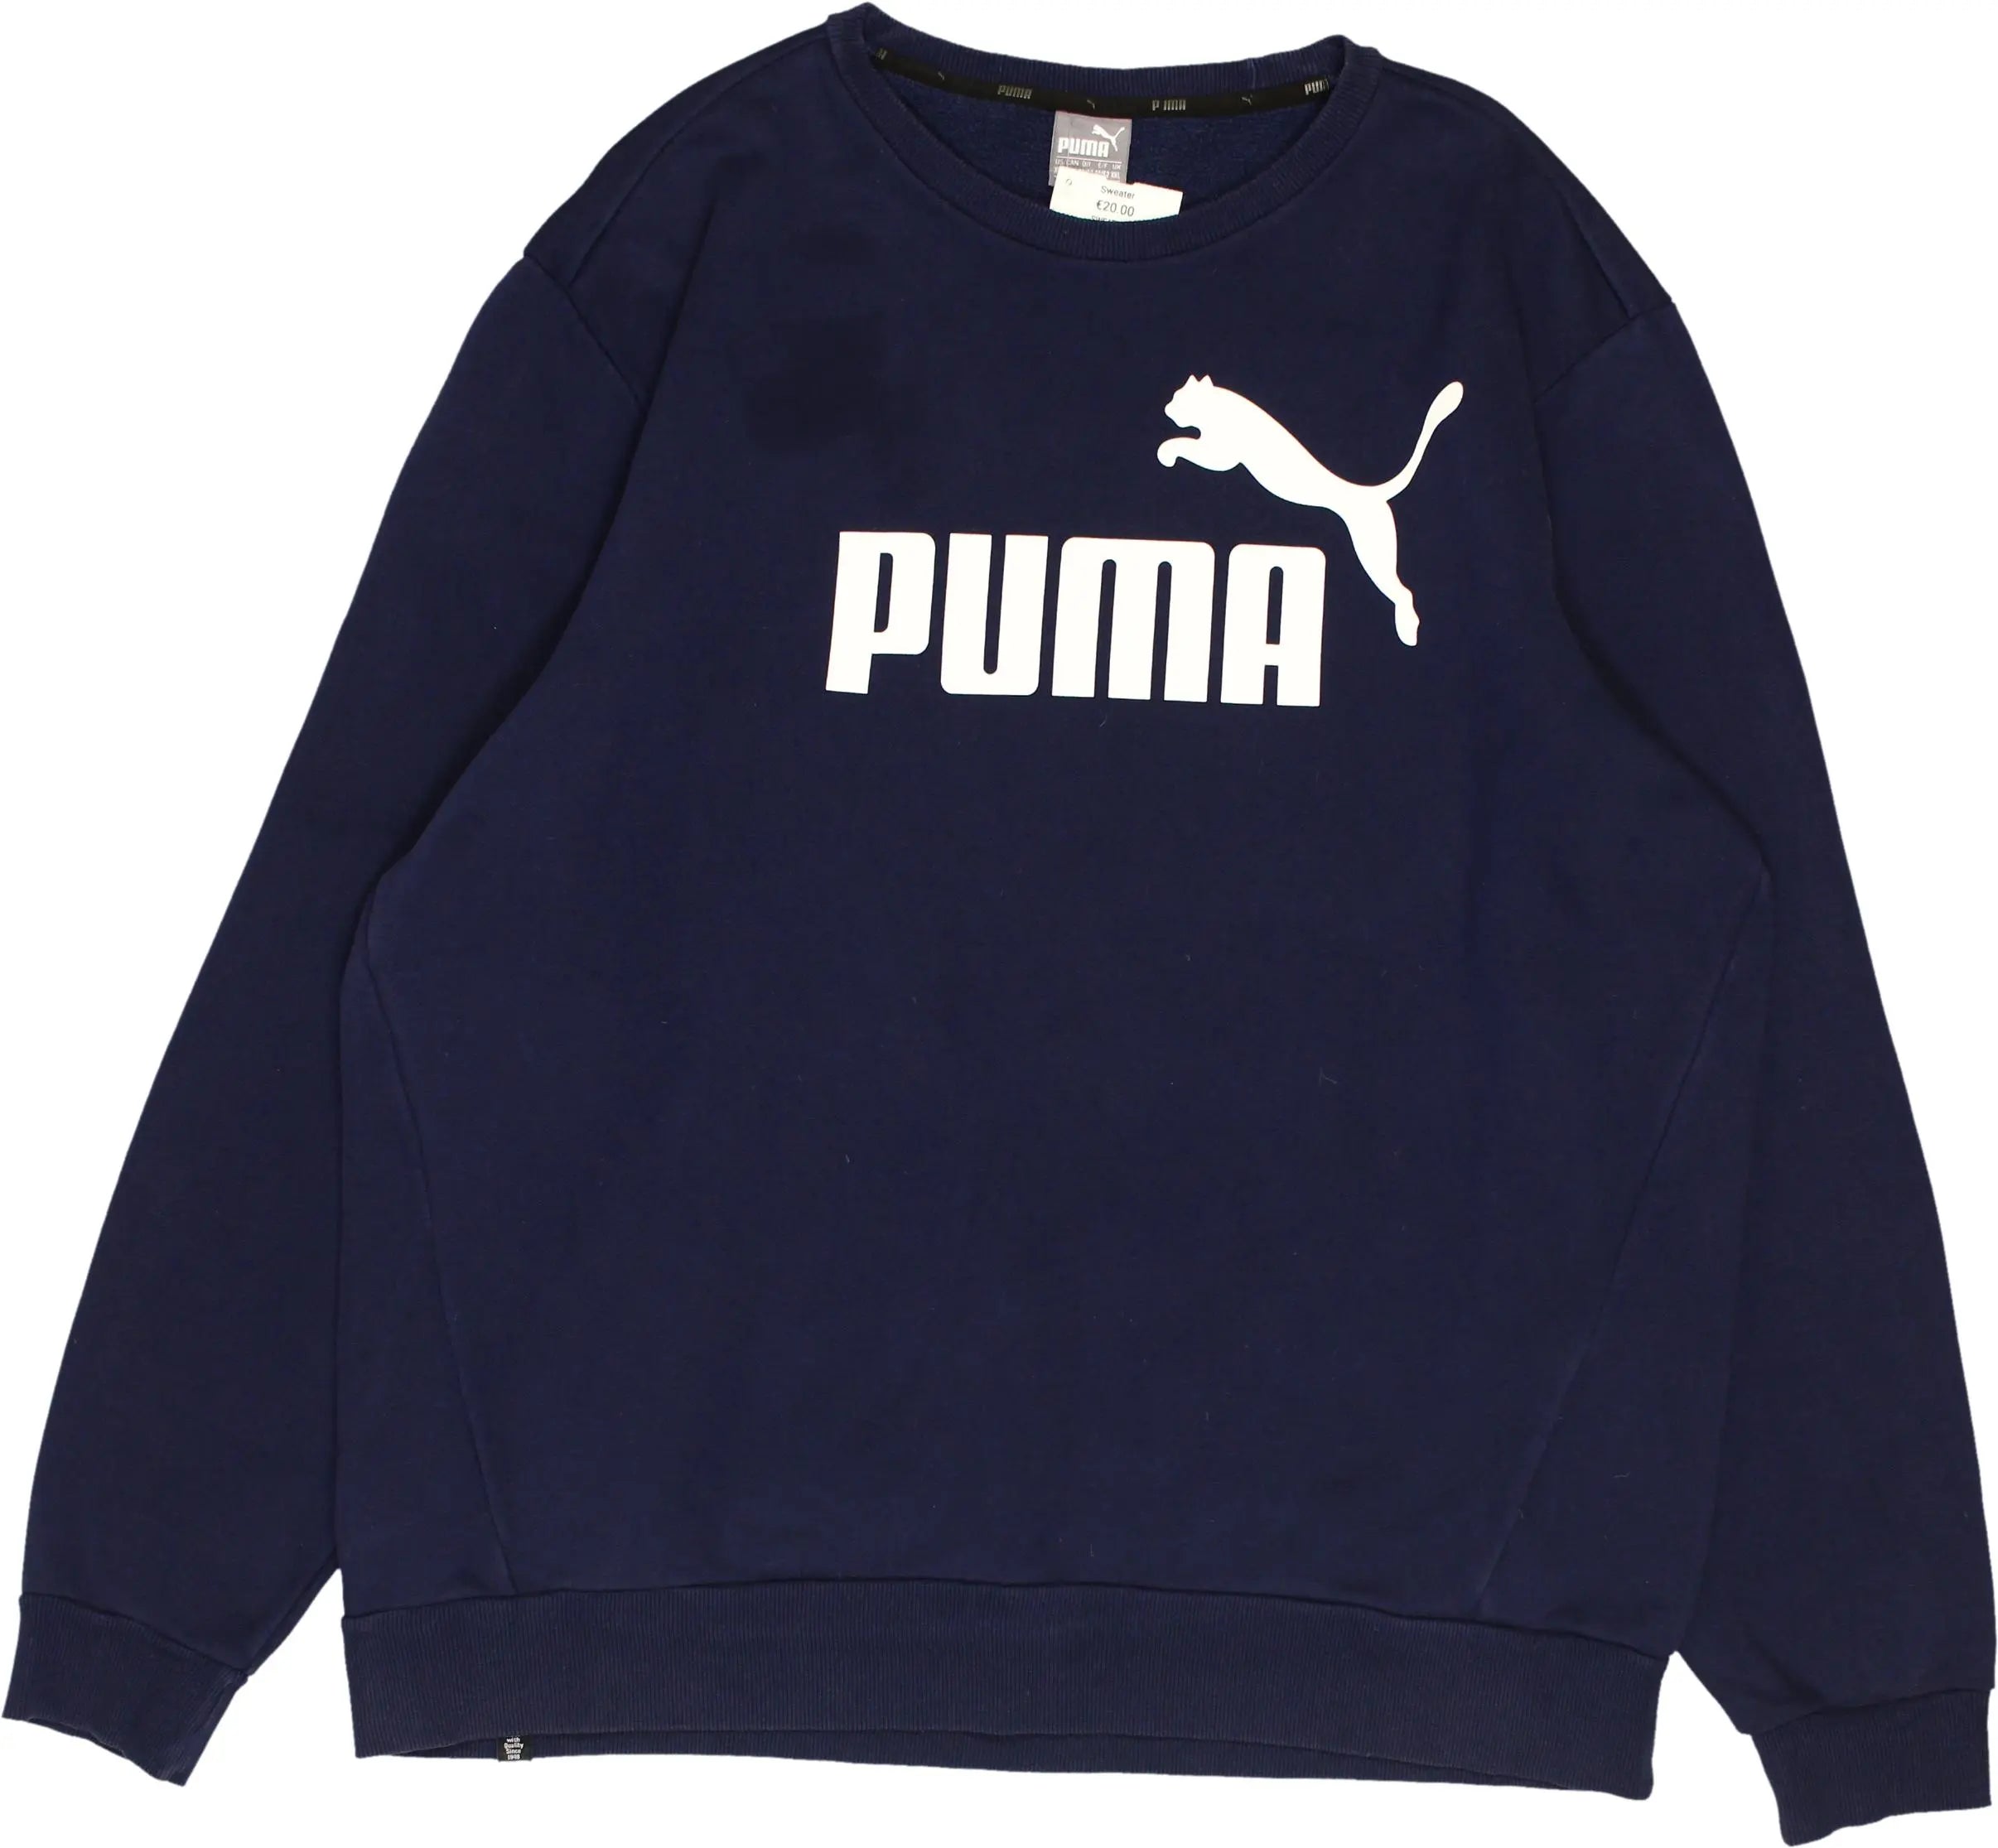 Puma - Navy Puma sweater- ThriftTale.com - Vintage and second handclothing